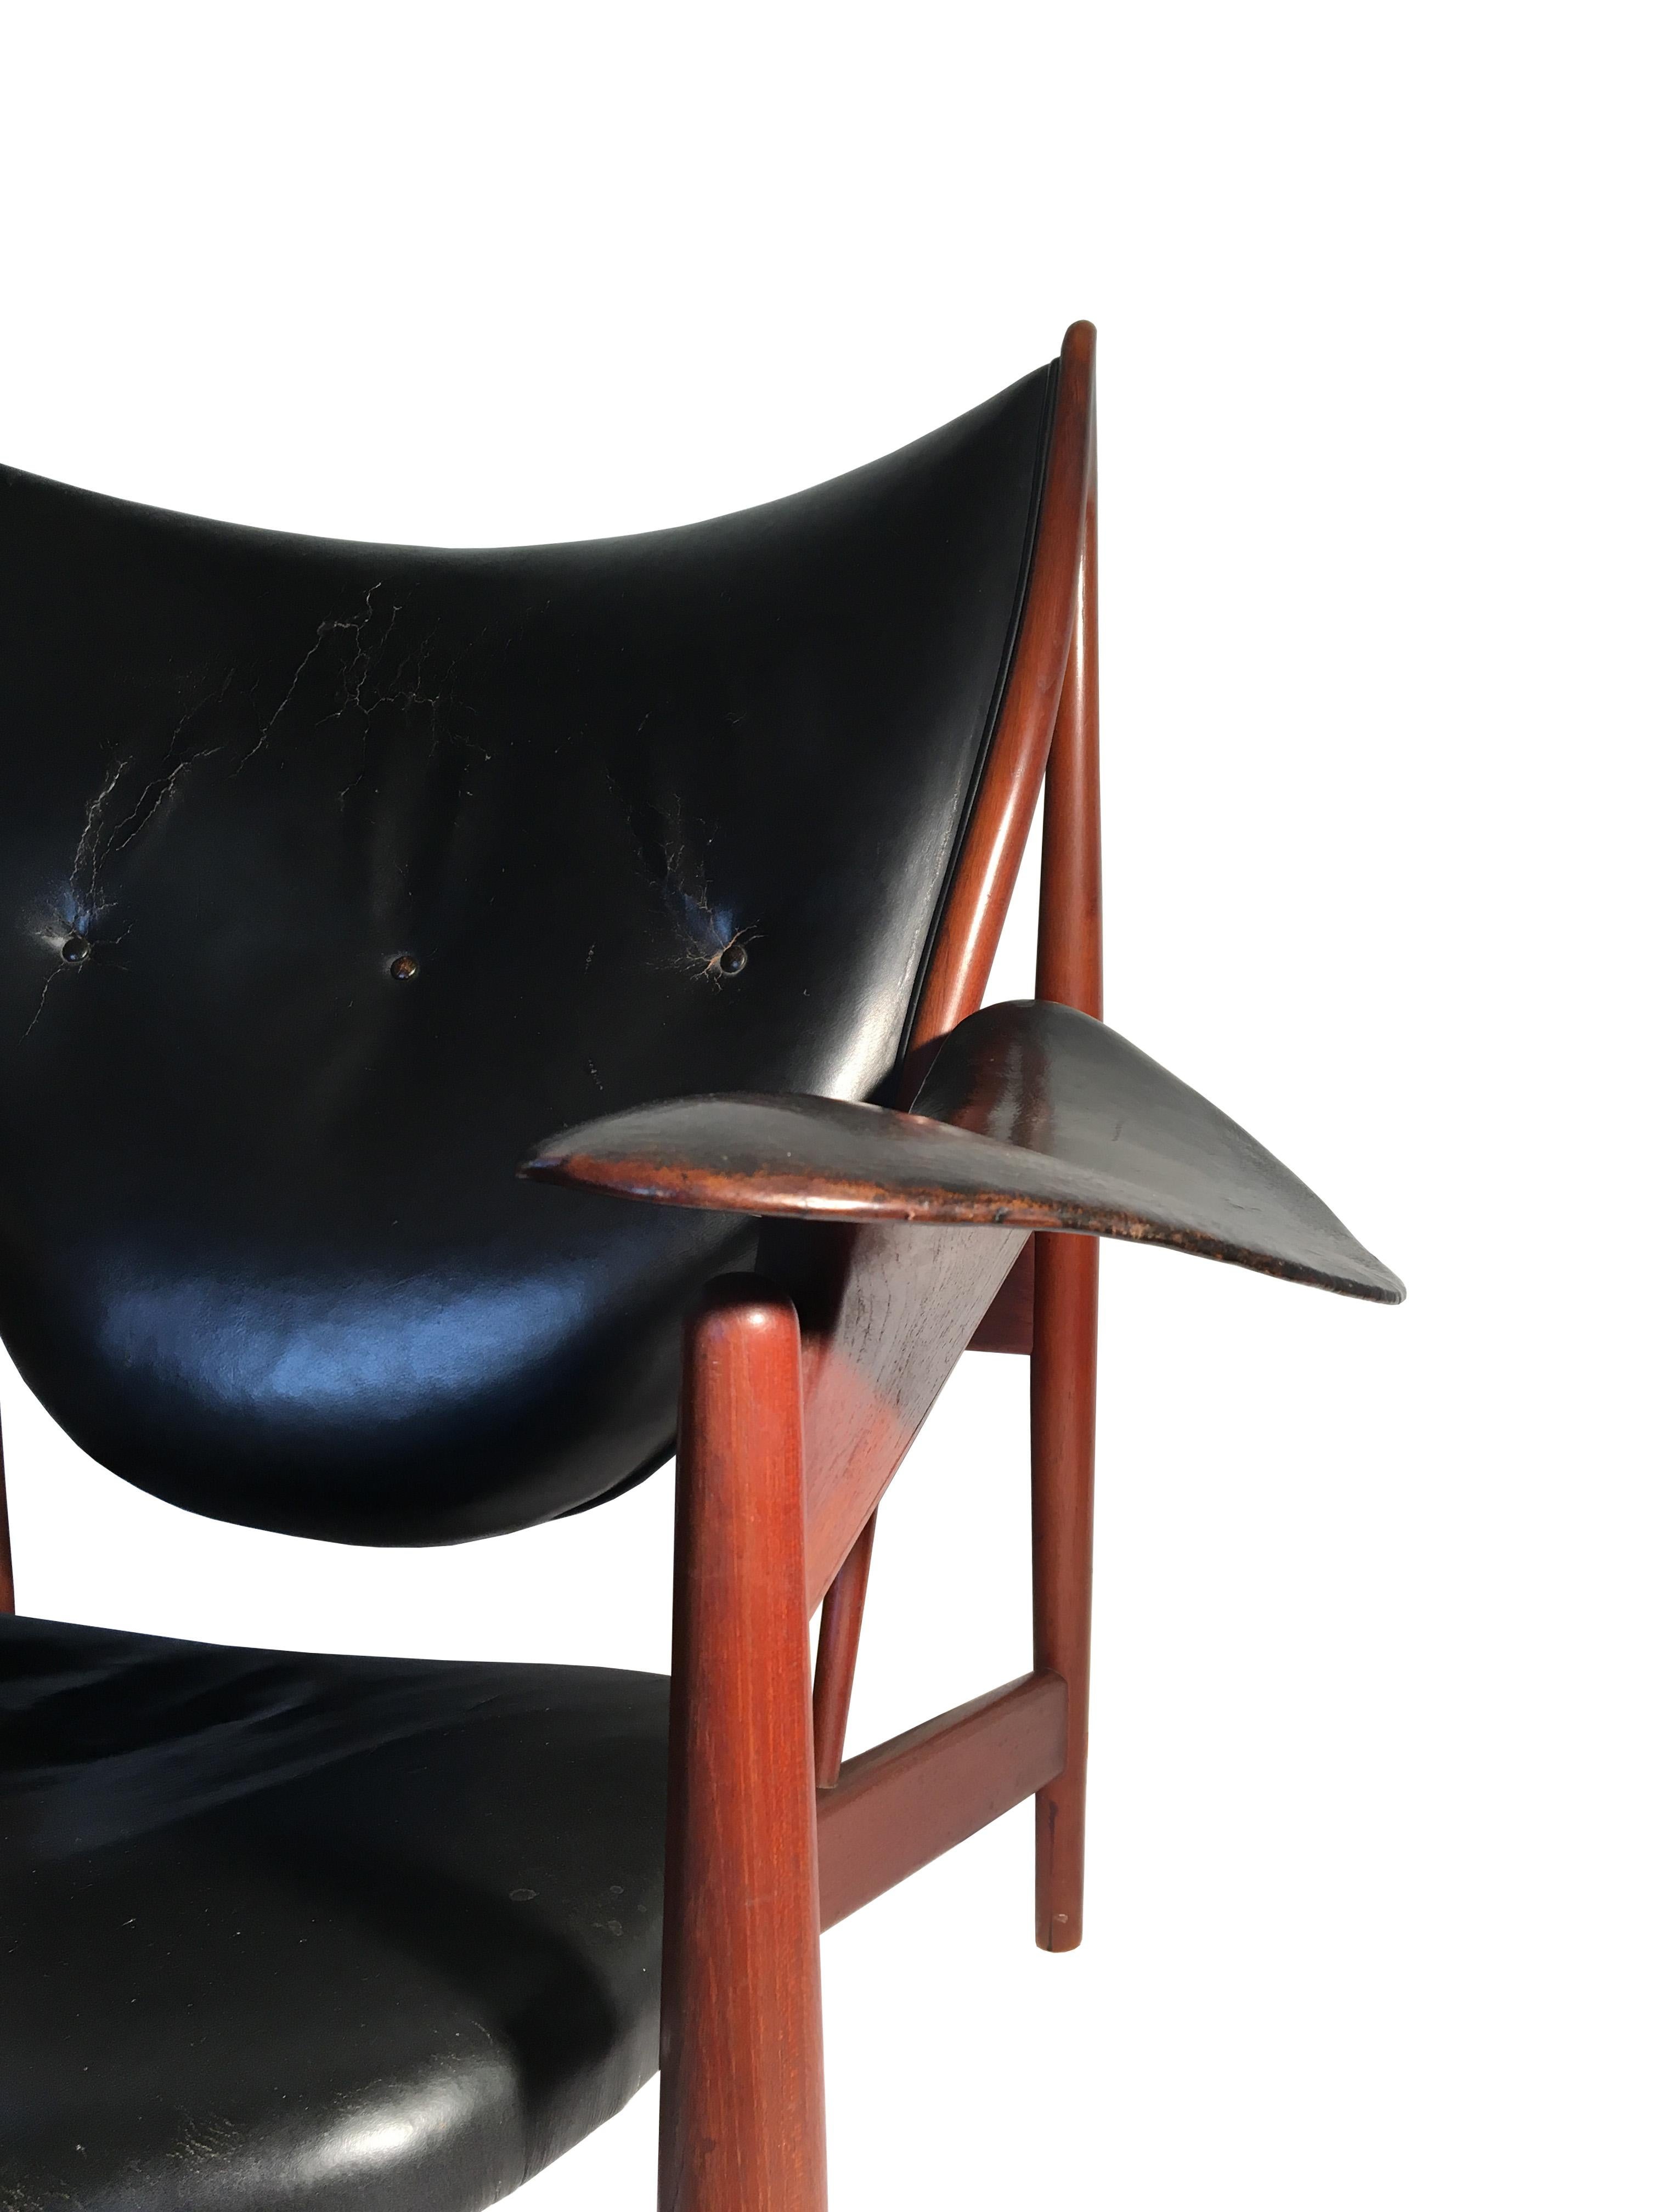 Finn Juhl Chieftain Chair for Niels Vodder in Teak and Black Leather In Good Condition For Sale In Victoria, BC